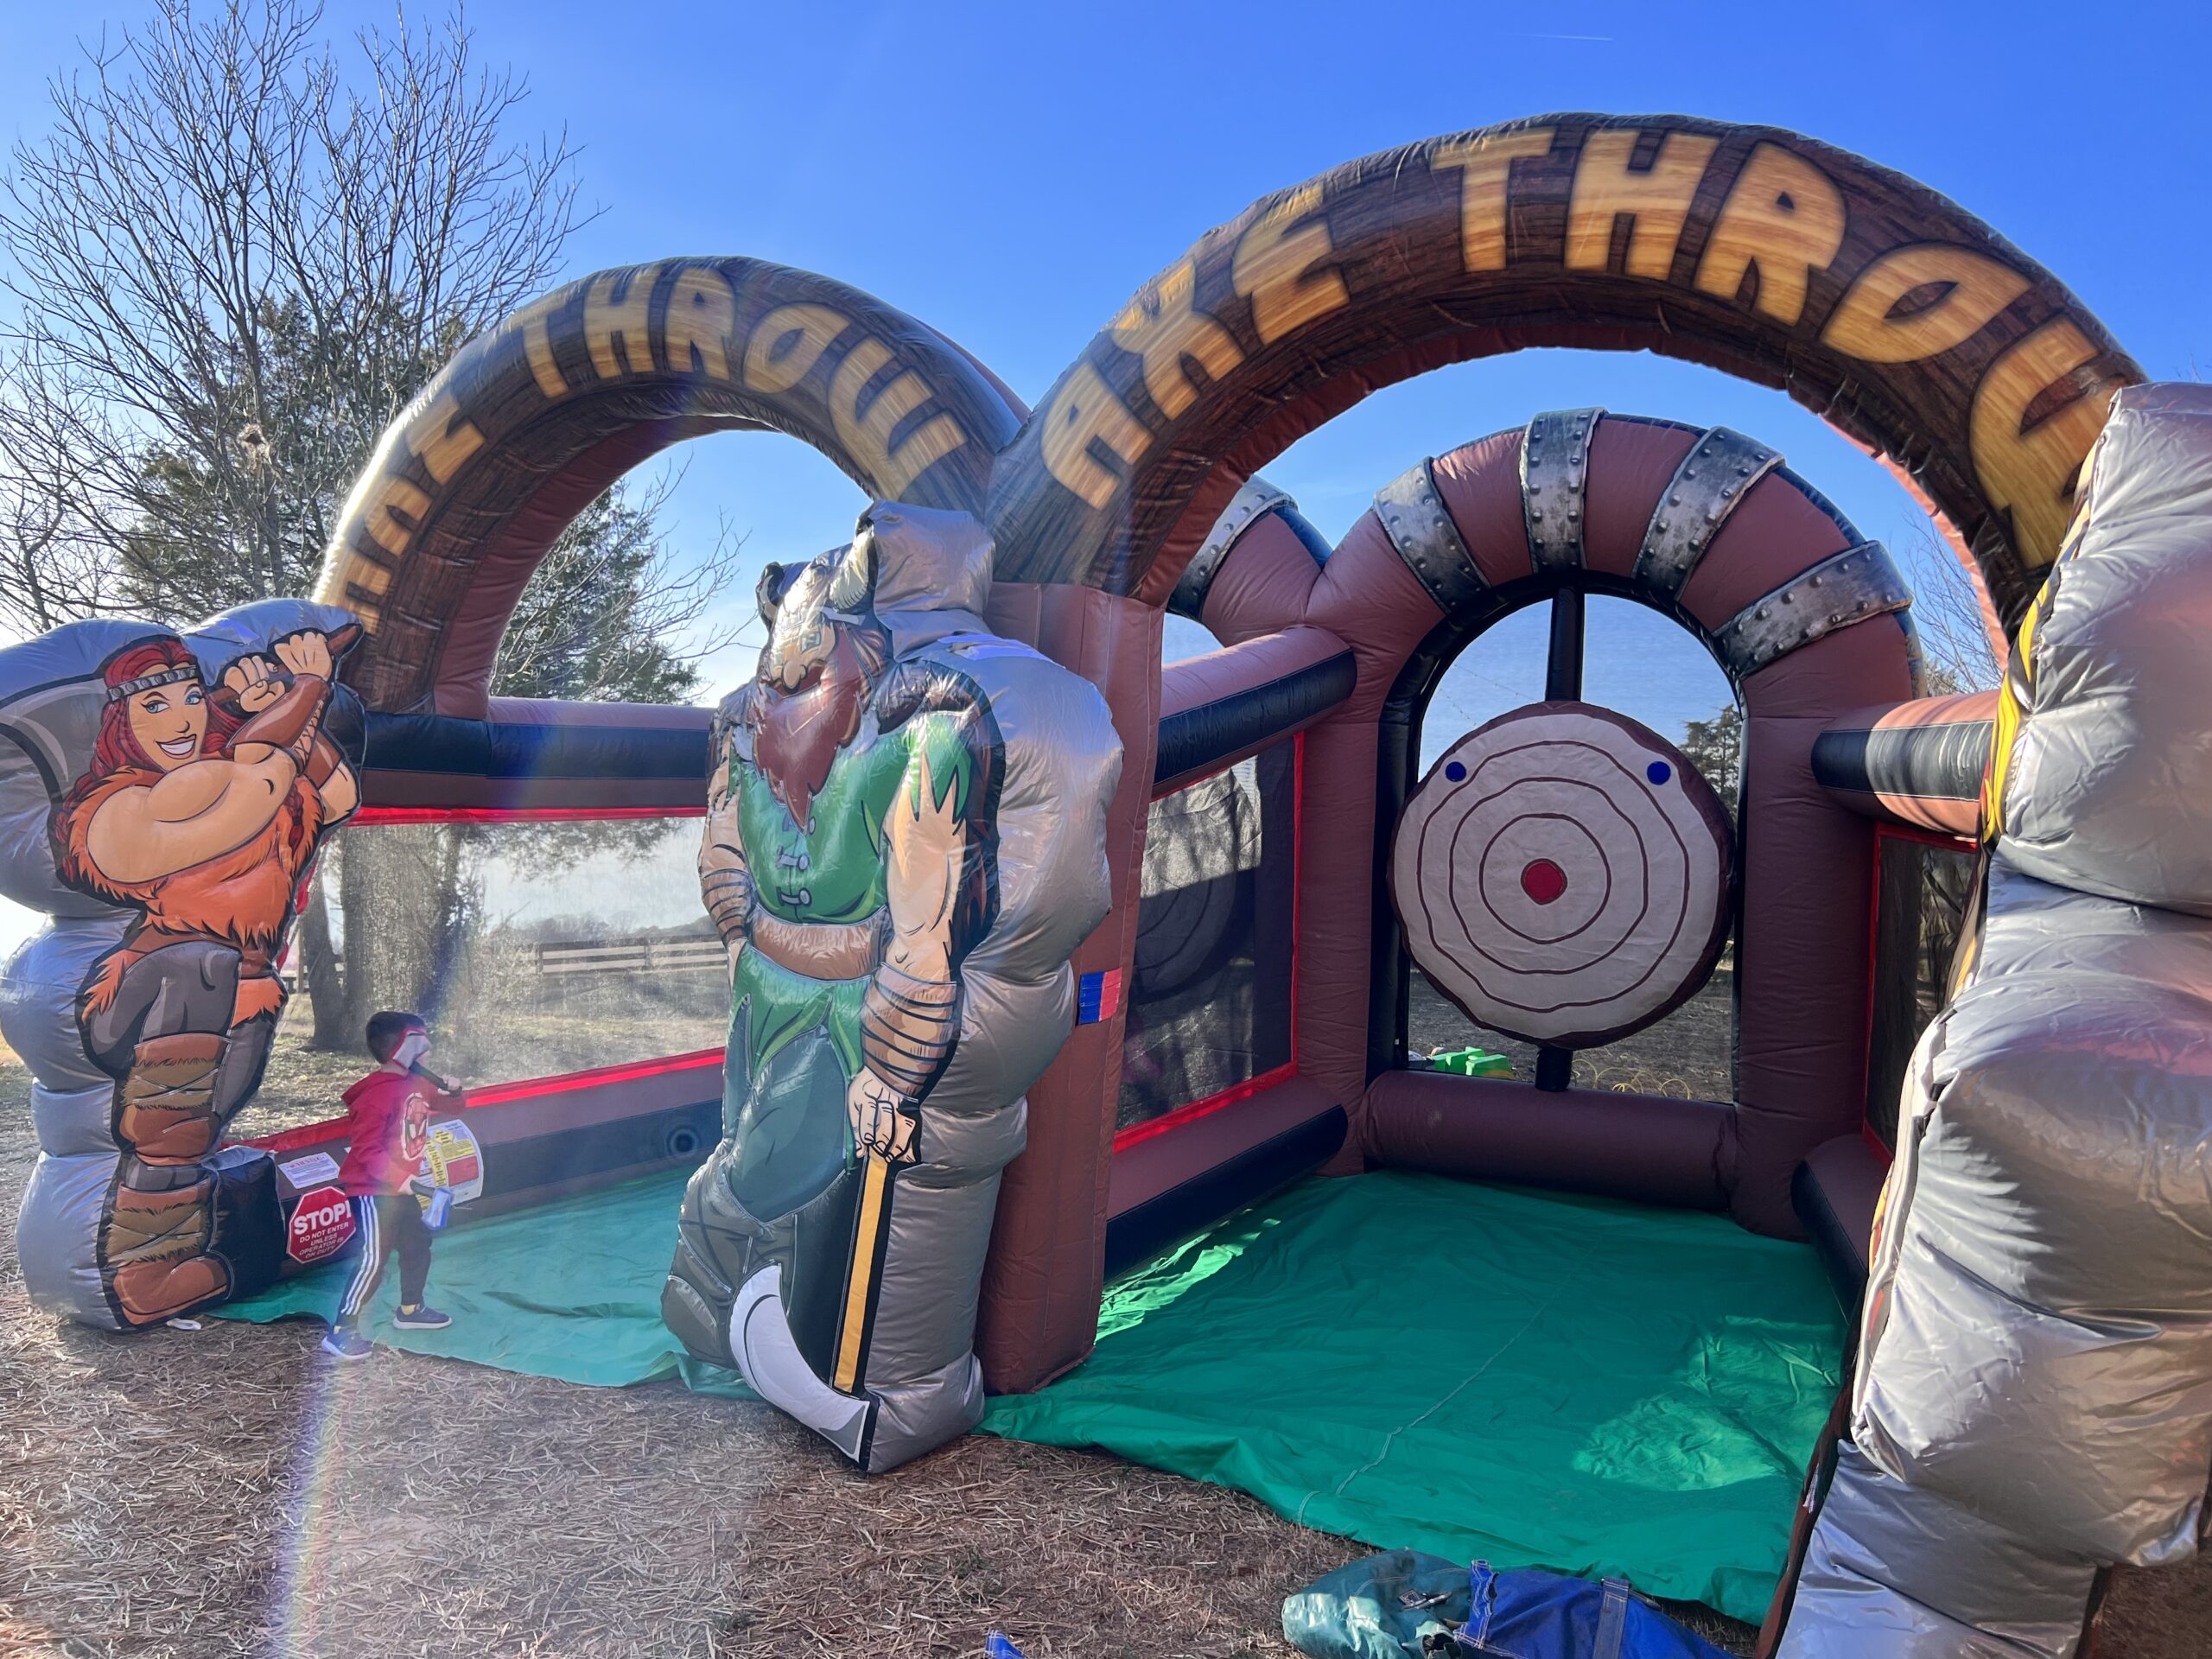 Ax throwing inflatable rental for kid's parties.